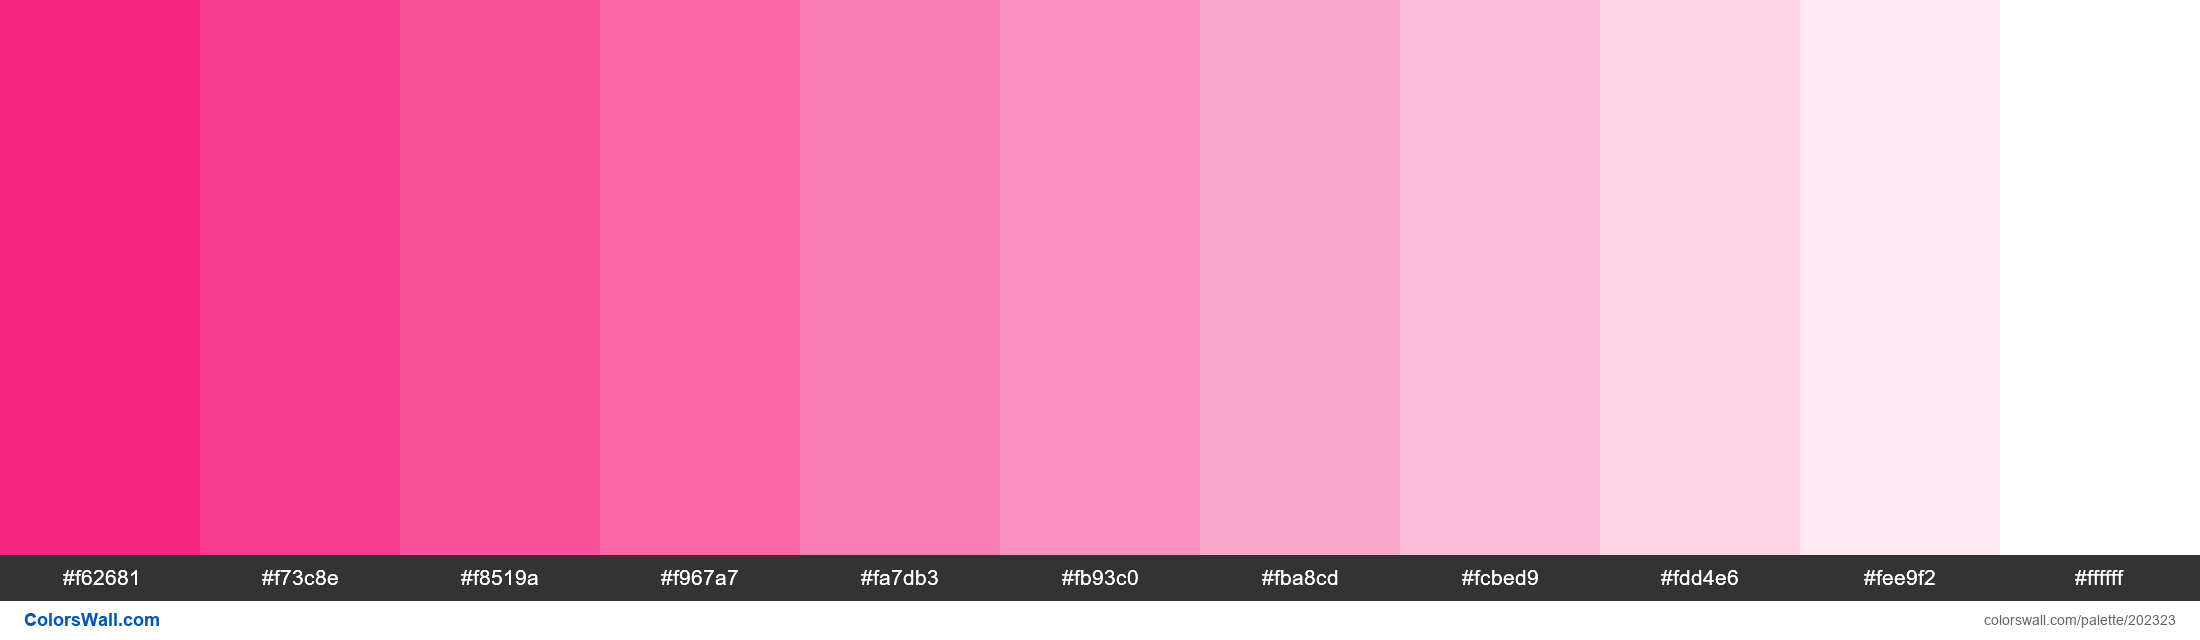 https://colorswall.com/images/palettes/electric-pink-202323-colorswall.png